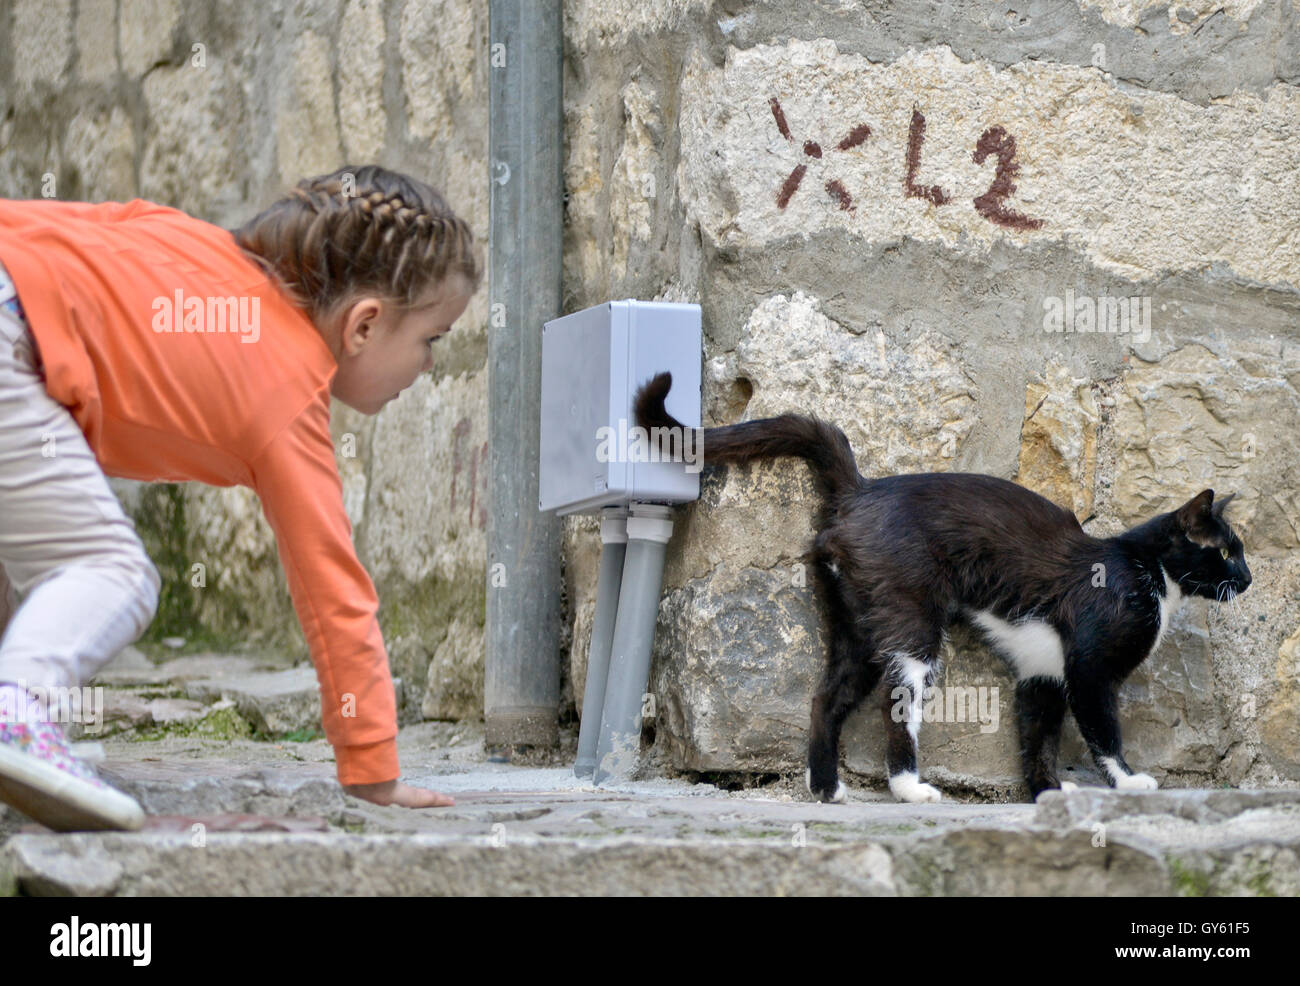 A little girl chasing a cat in the streets of Kotor Old Town, Montenegro Stock Photo